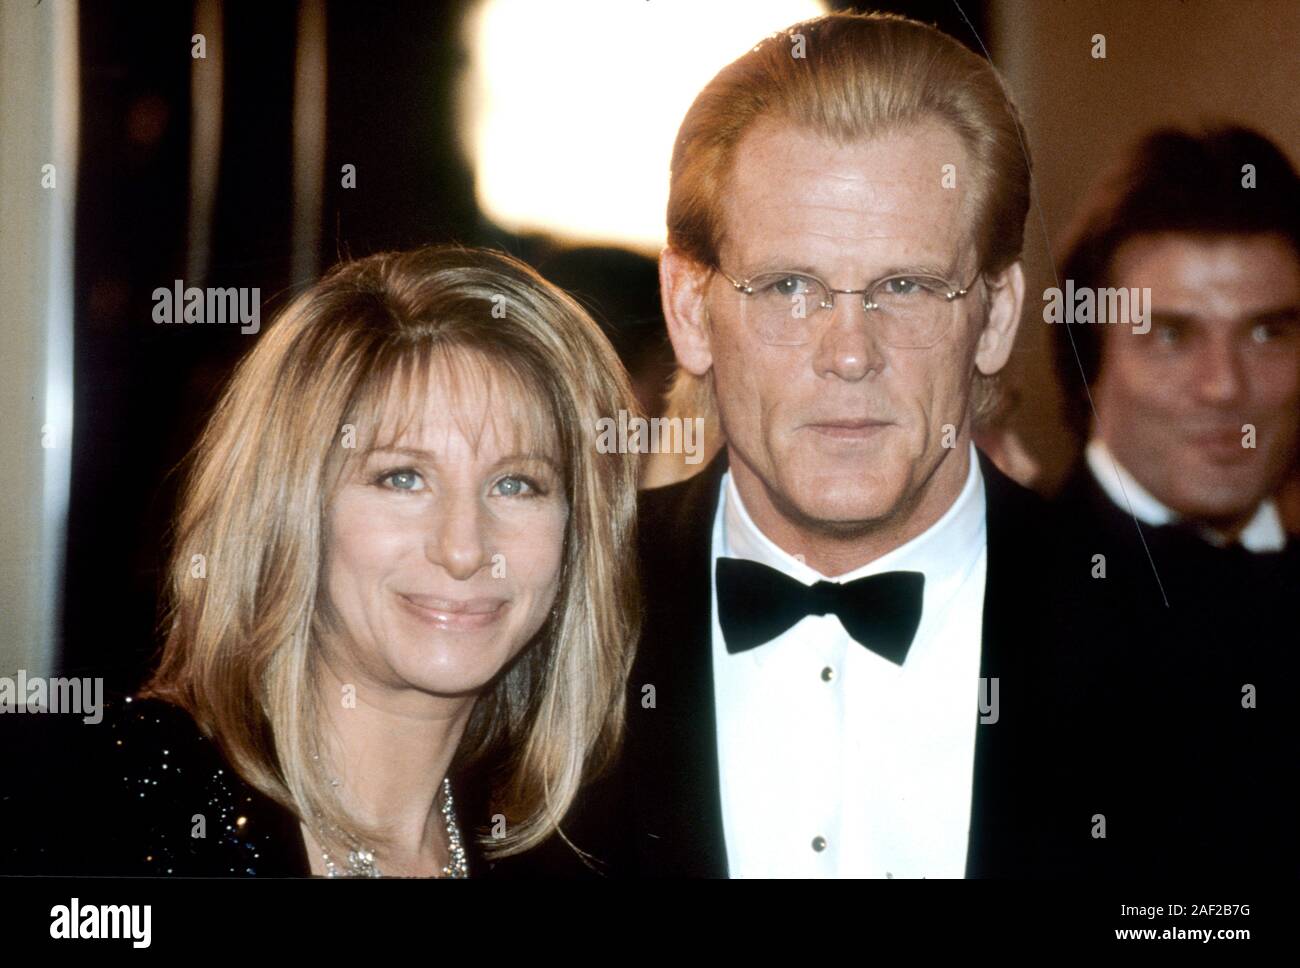 Barbra Streisand and Nick Nolte meet HRH Princess Diana at the European movie premiere of The Prince of Tides, London, England 1991. Stock Photo